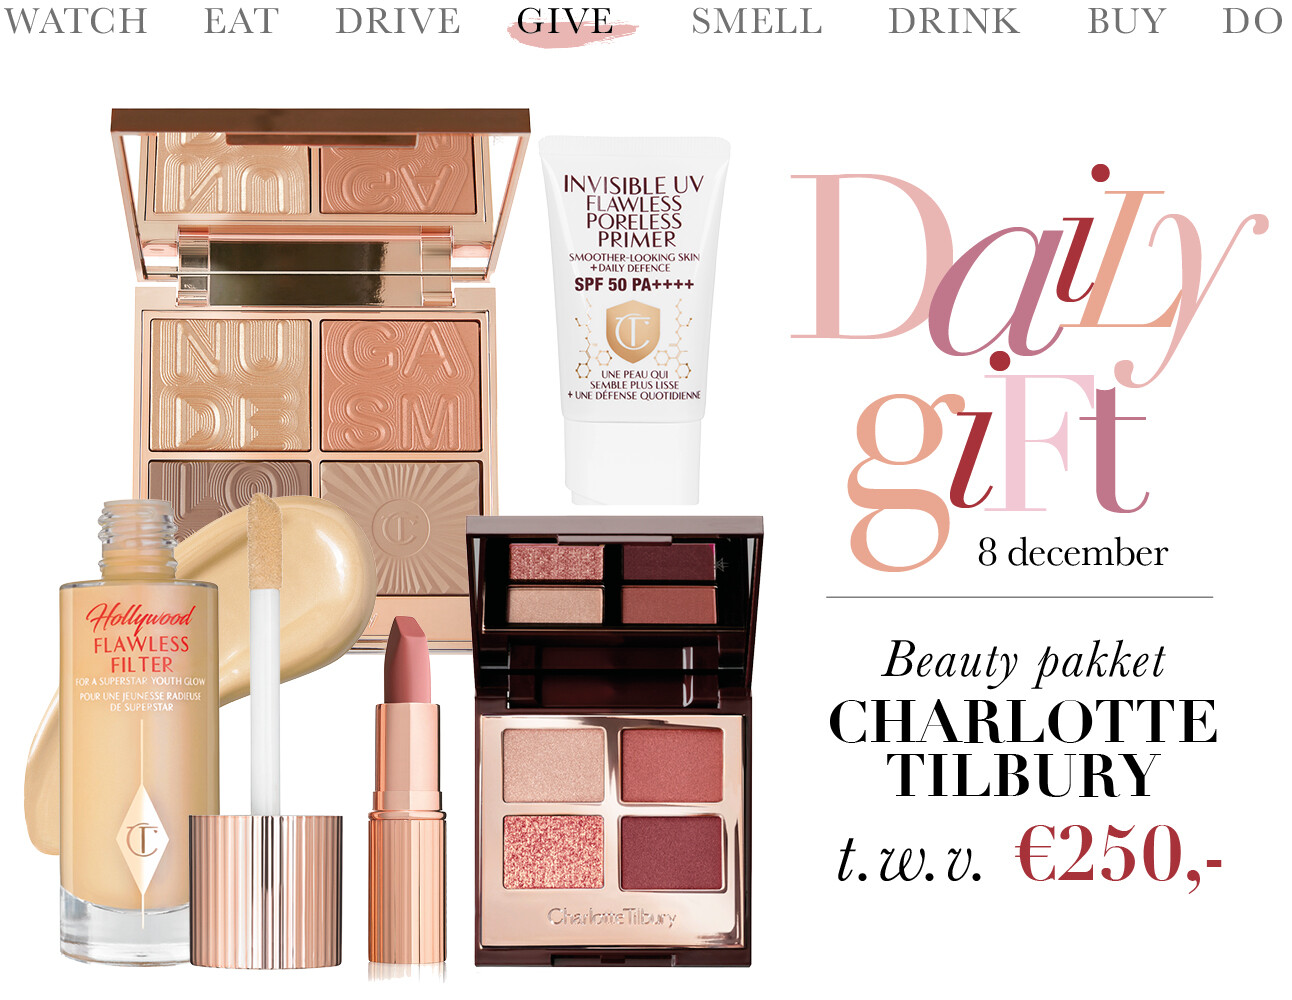 Today We Give Charlotte Tilbury